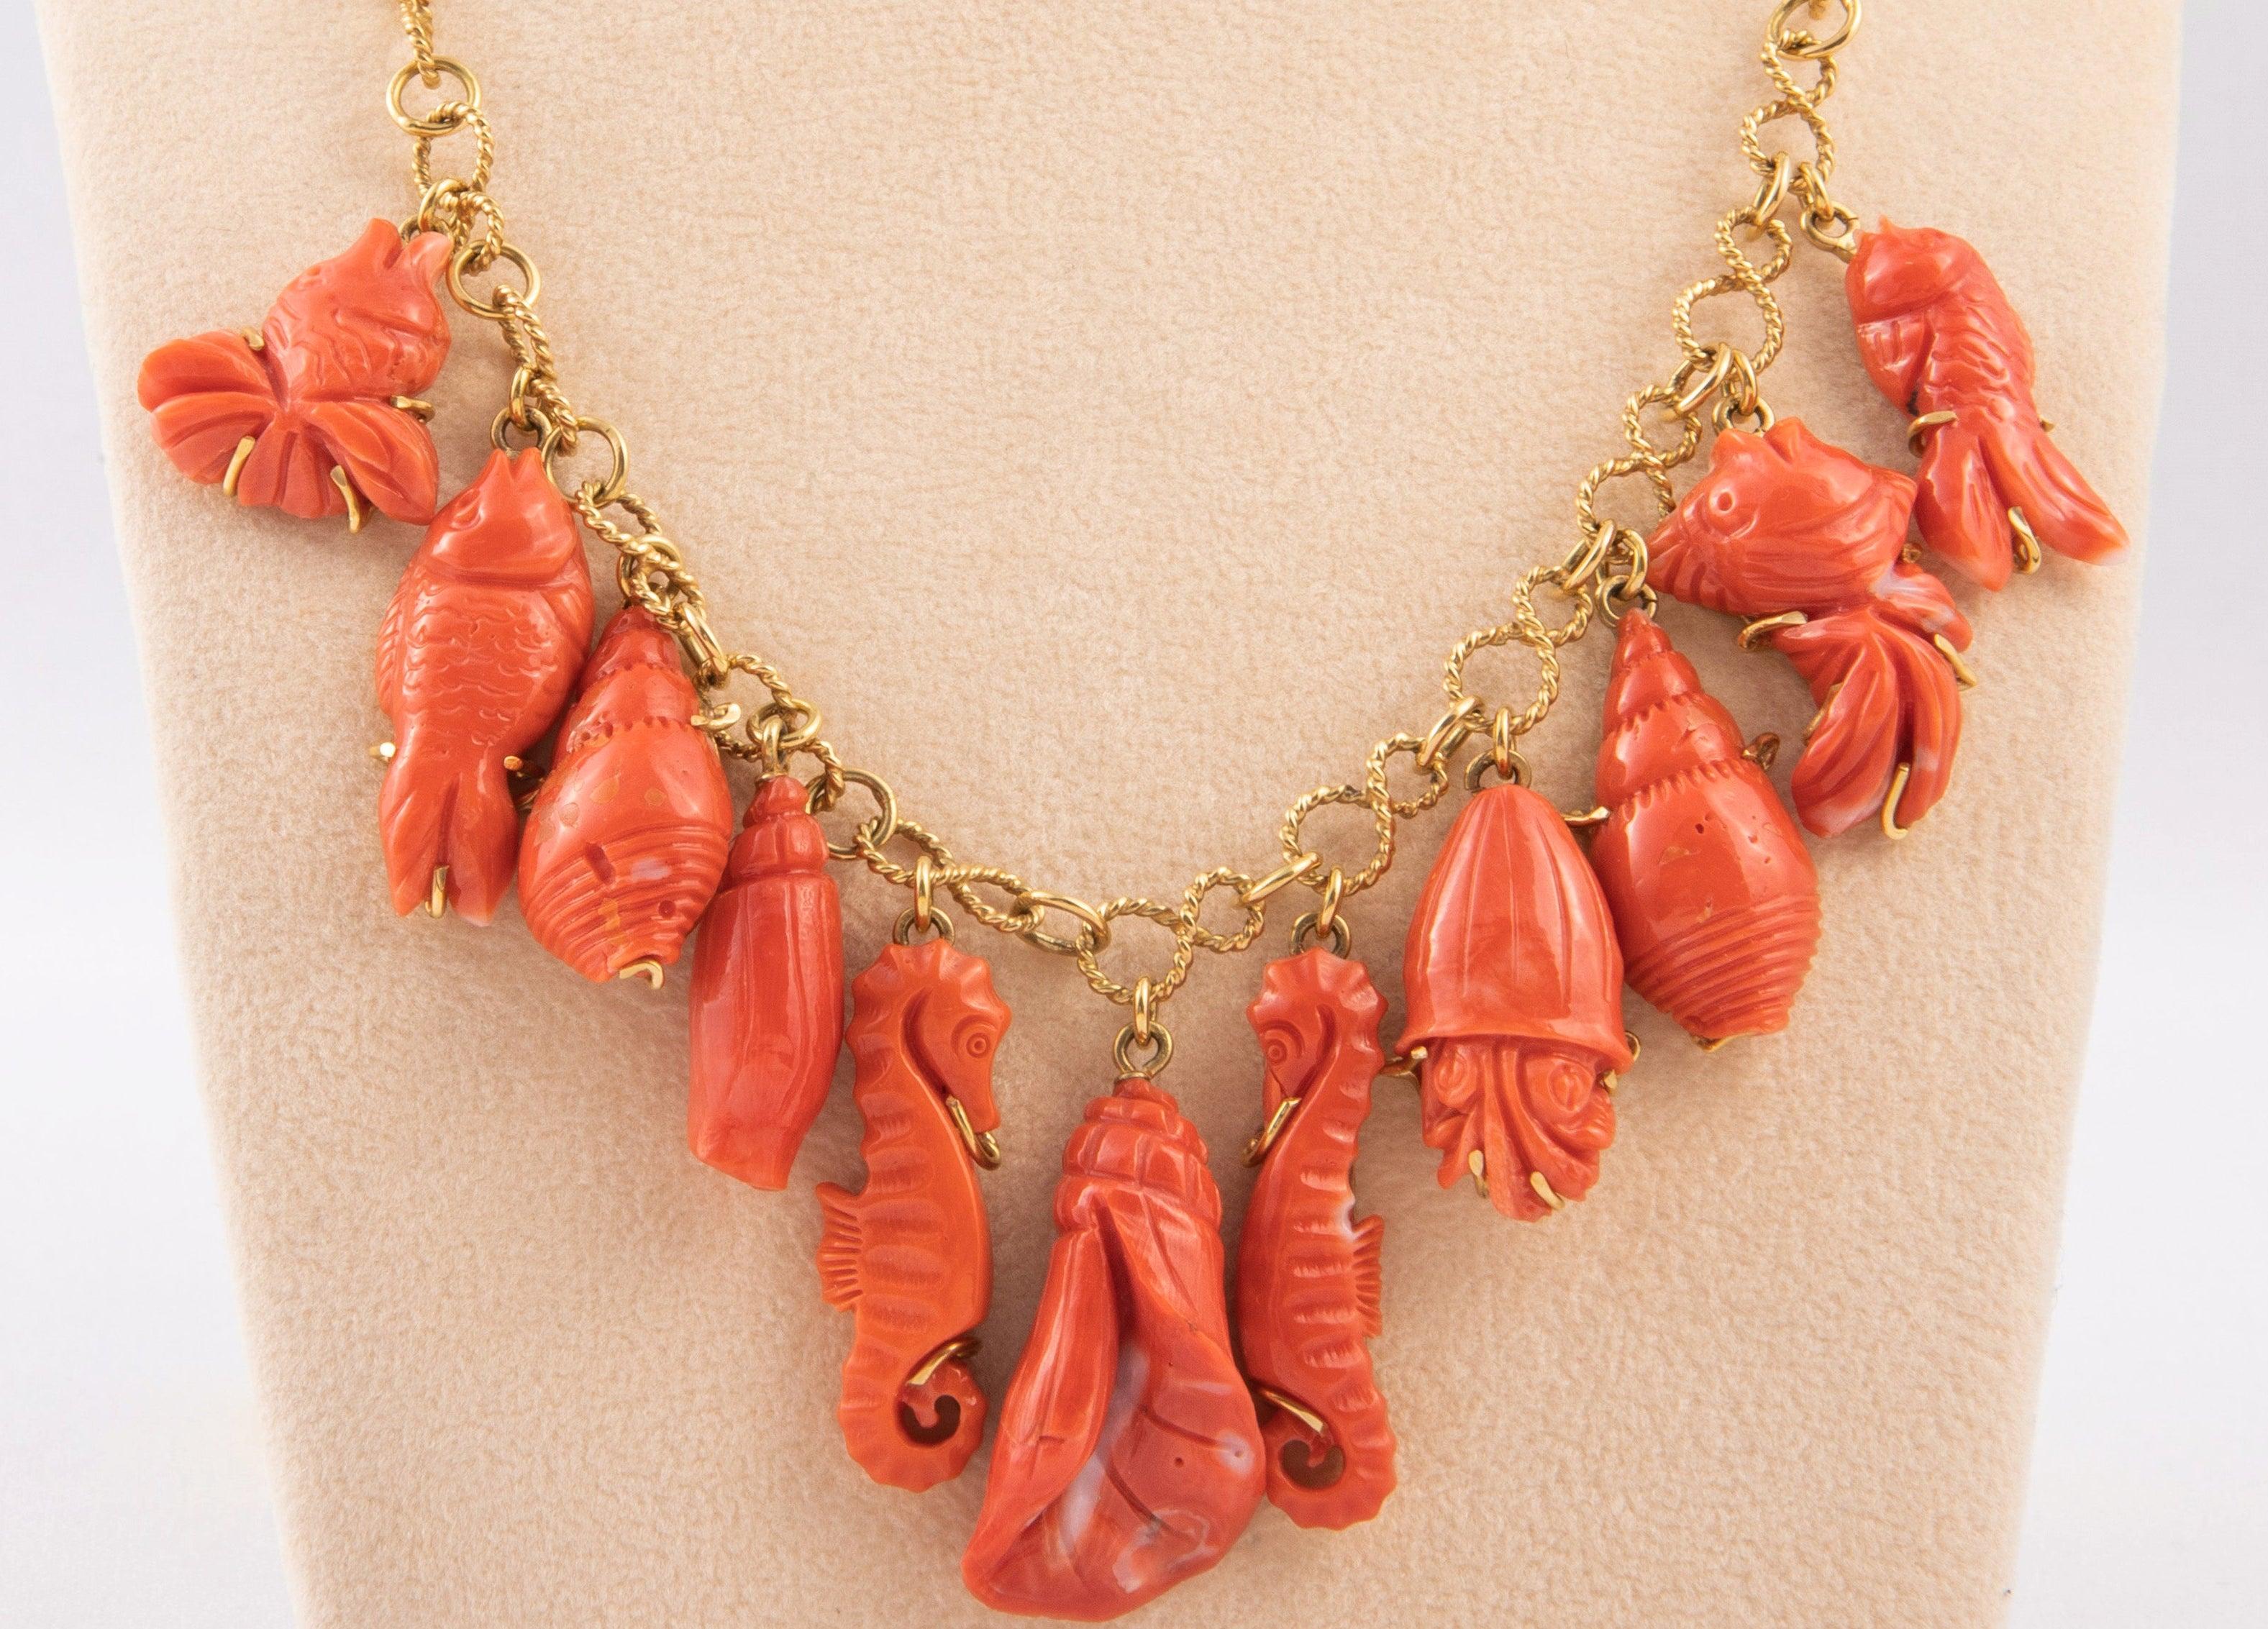 18 kt gold link necklace with 11 hand engraved coral dangle charms depicting marine theme: shells ,sea horses, jellyfish and fish.
Italian manufacture 1990. weight 53gr total.